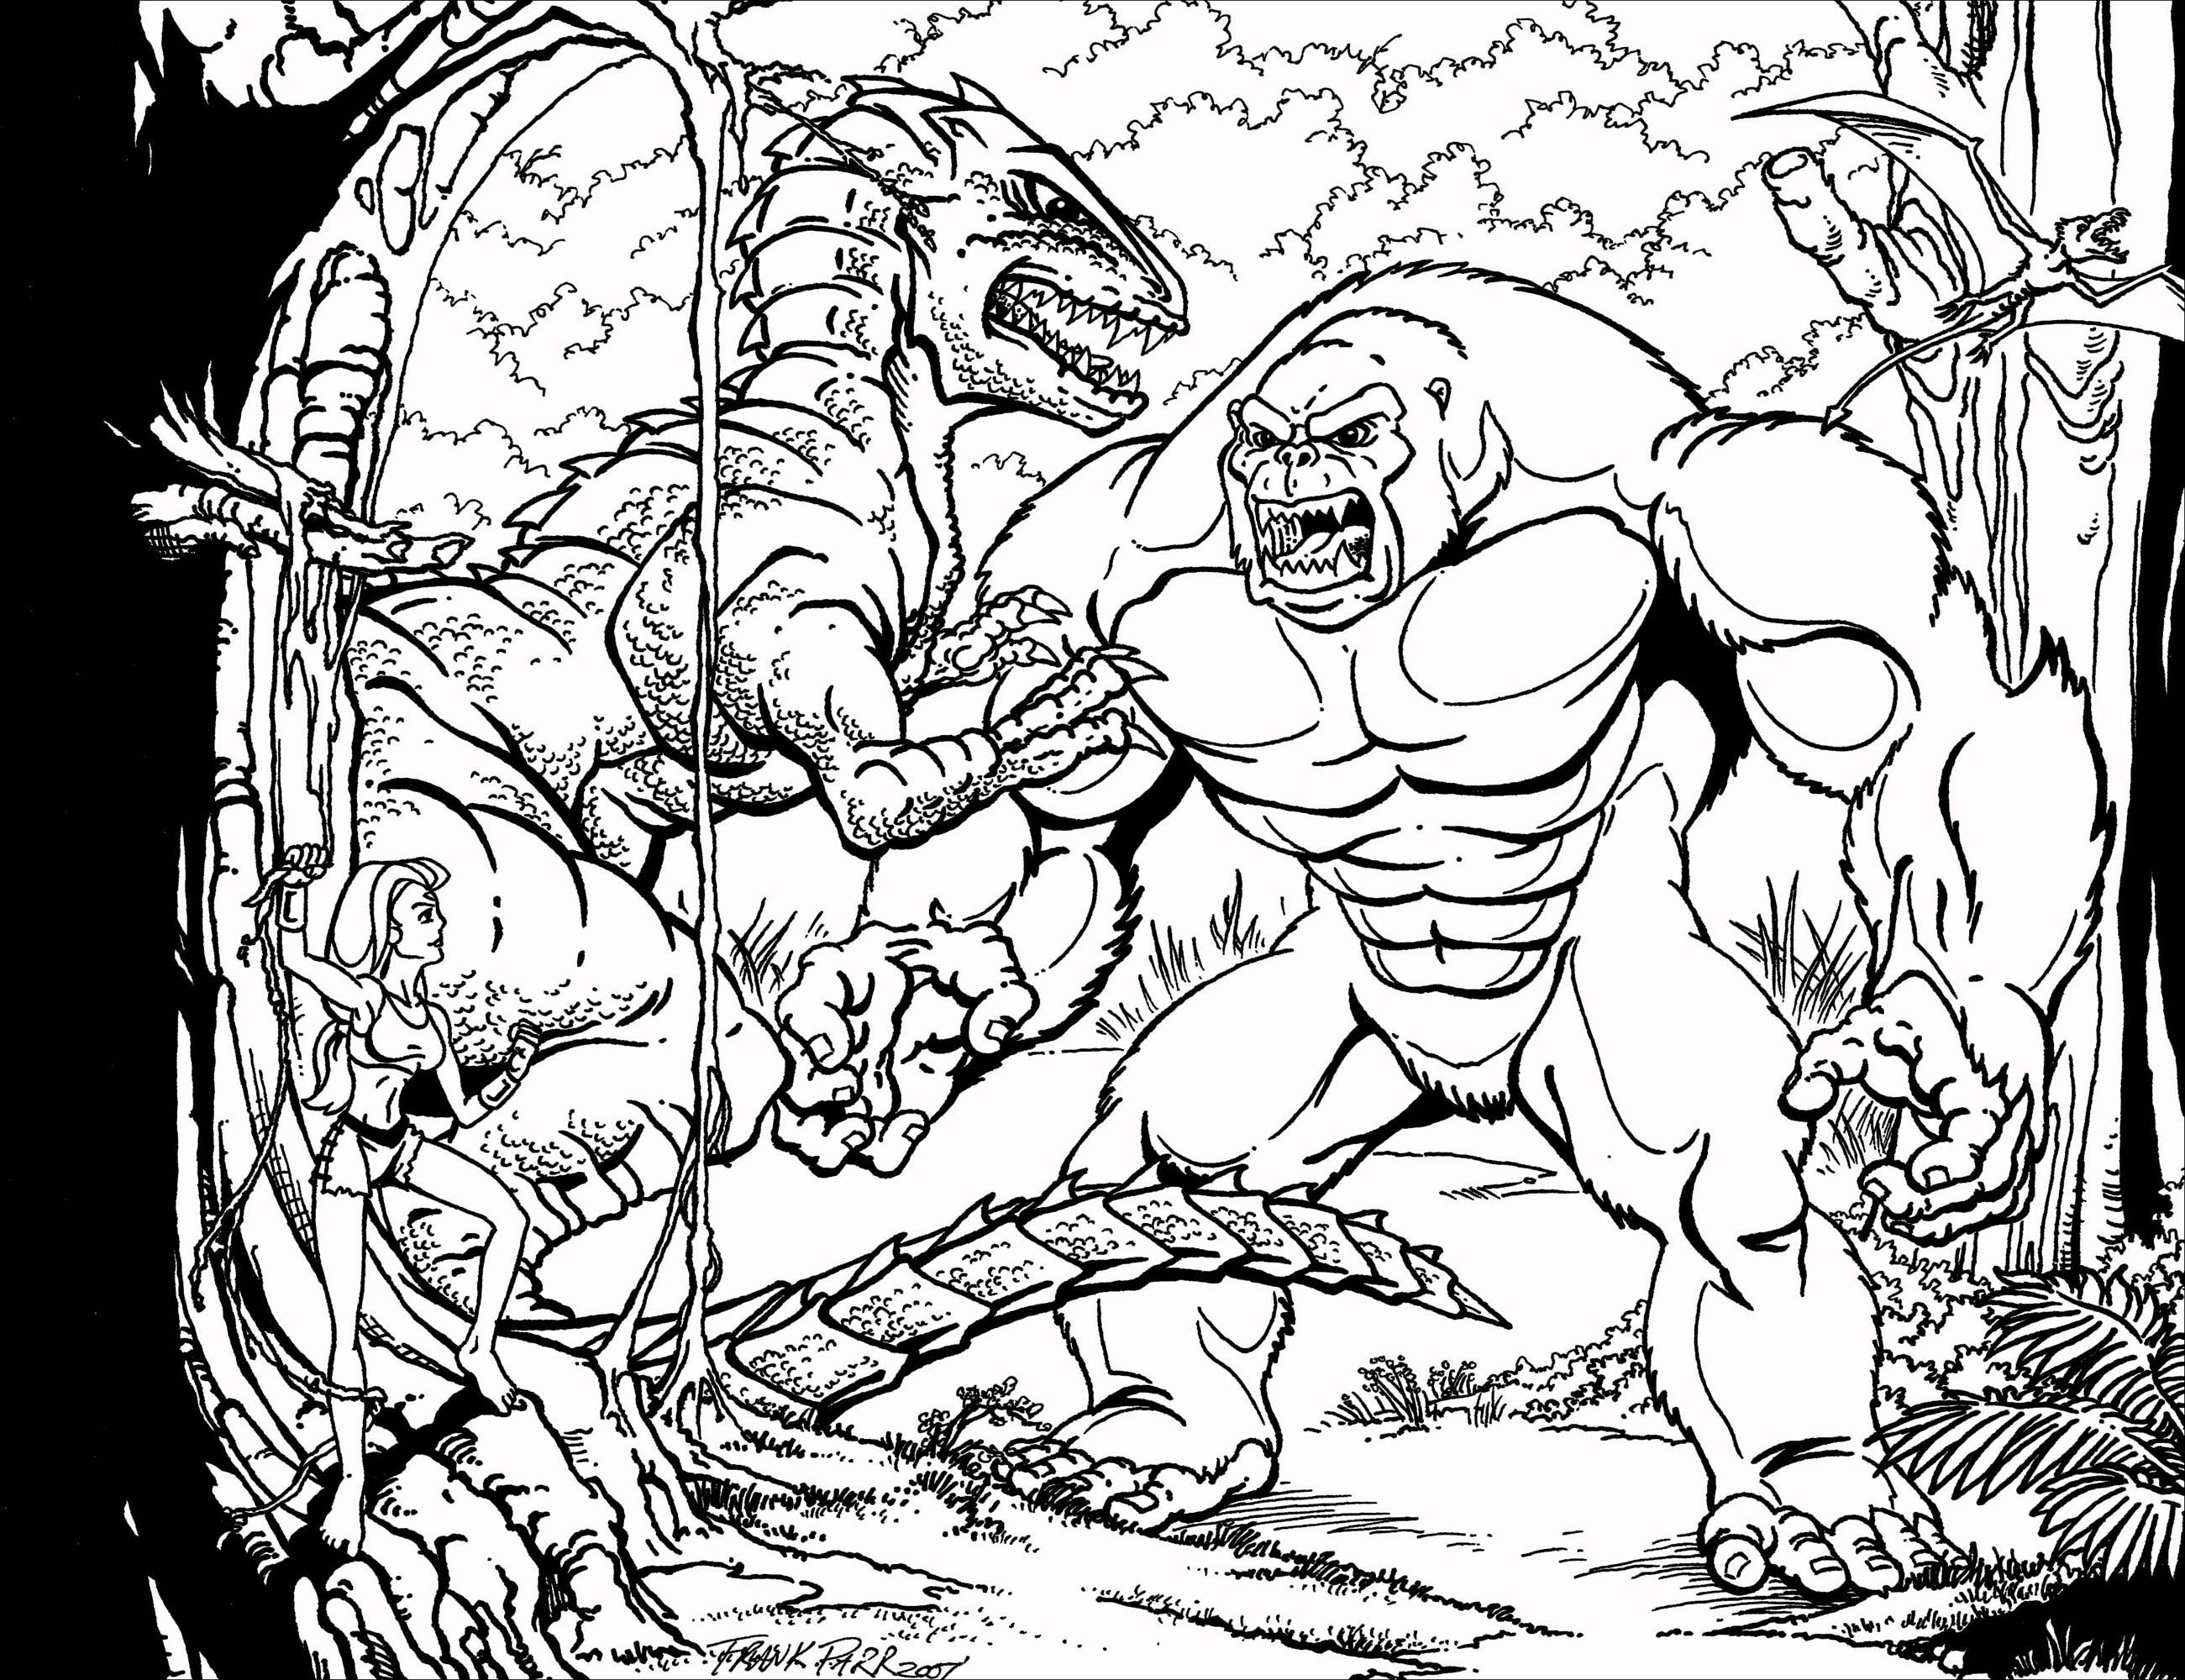 What a big fight! Color it to support your favorite !, Artist : Frank Parr